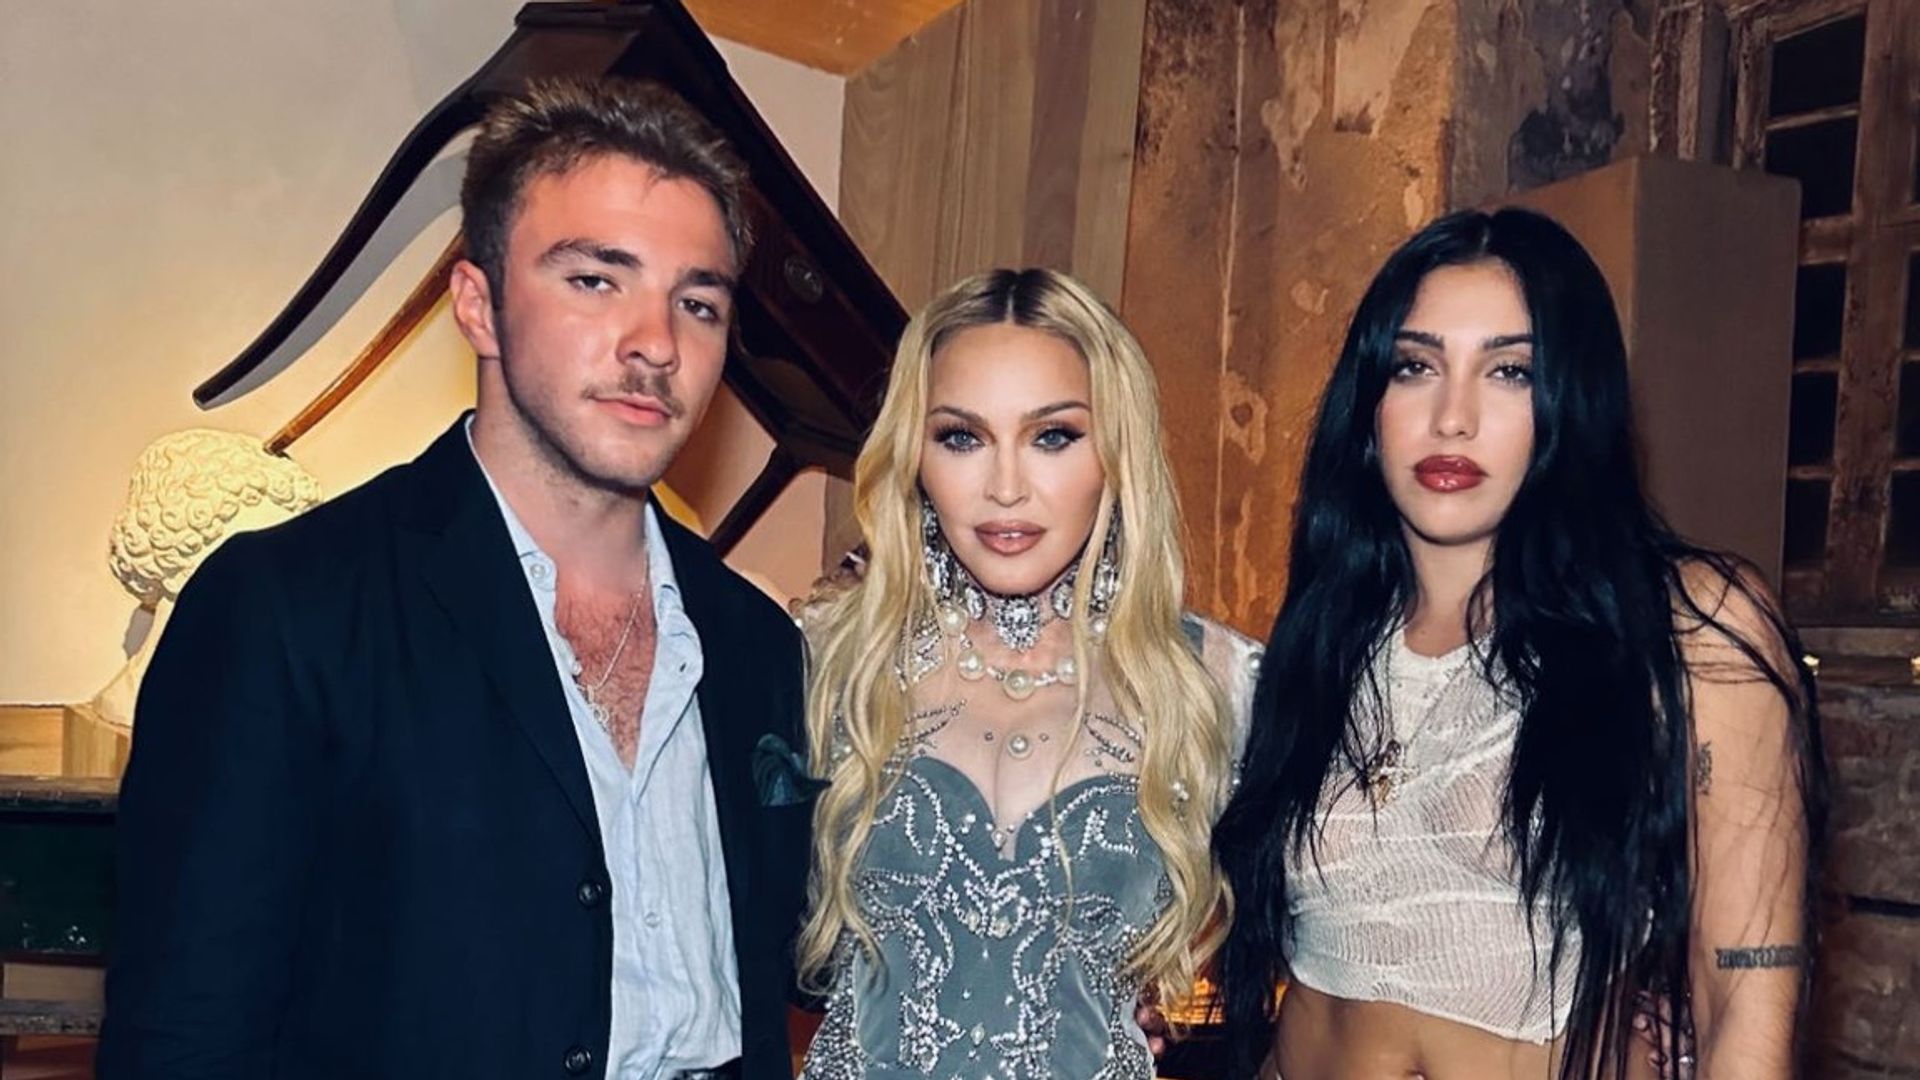 Lourdes Leon and Rocco Ritchie join Madonna during her 65th birthday celebration